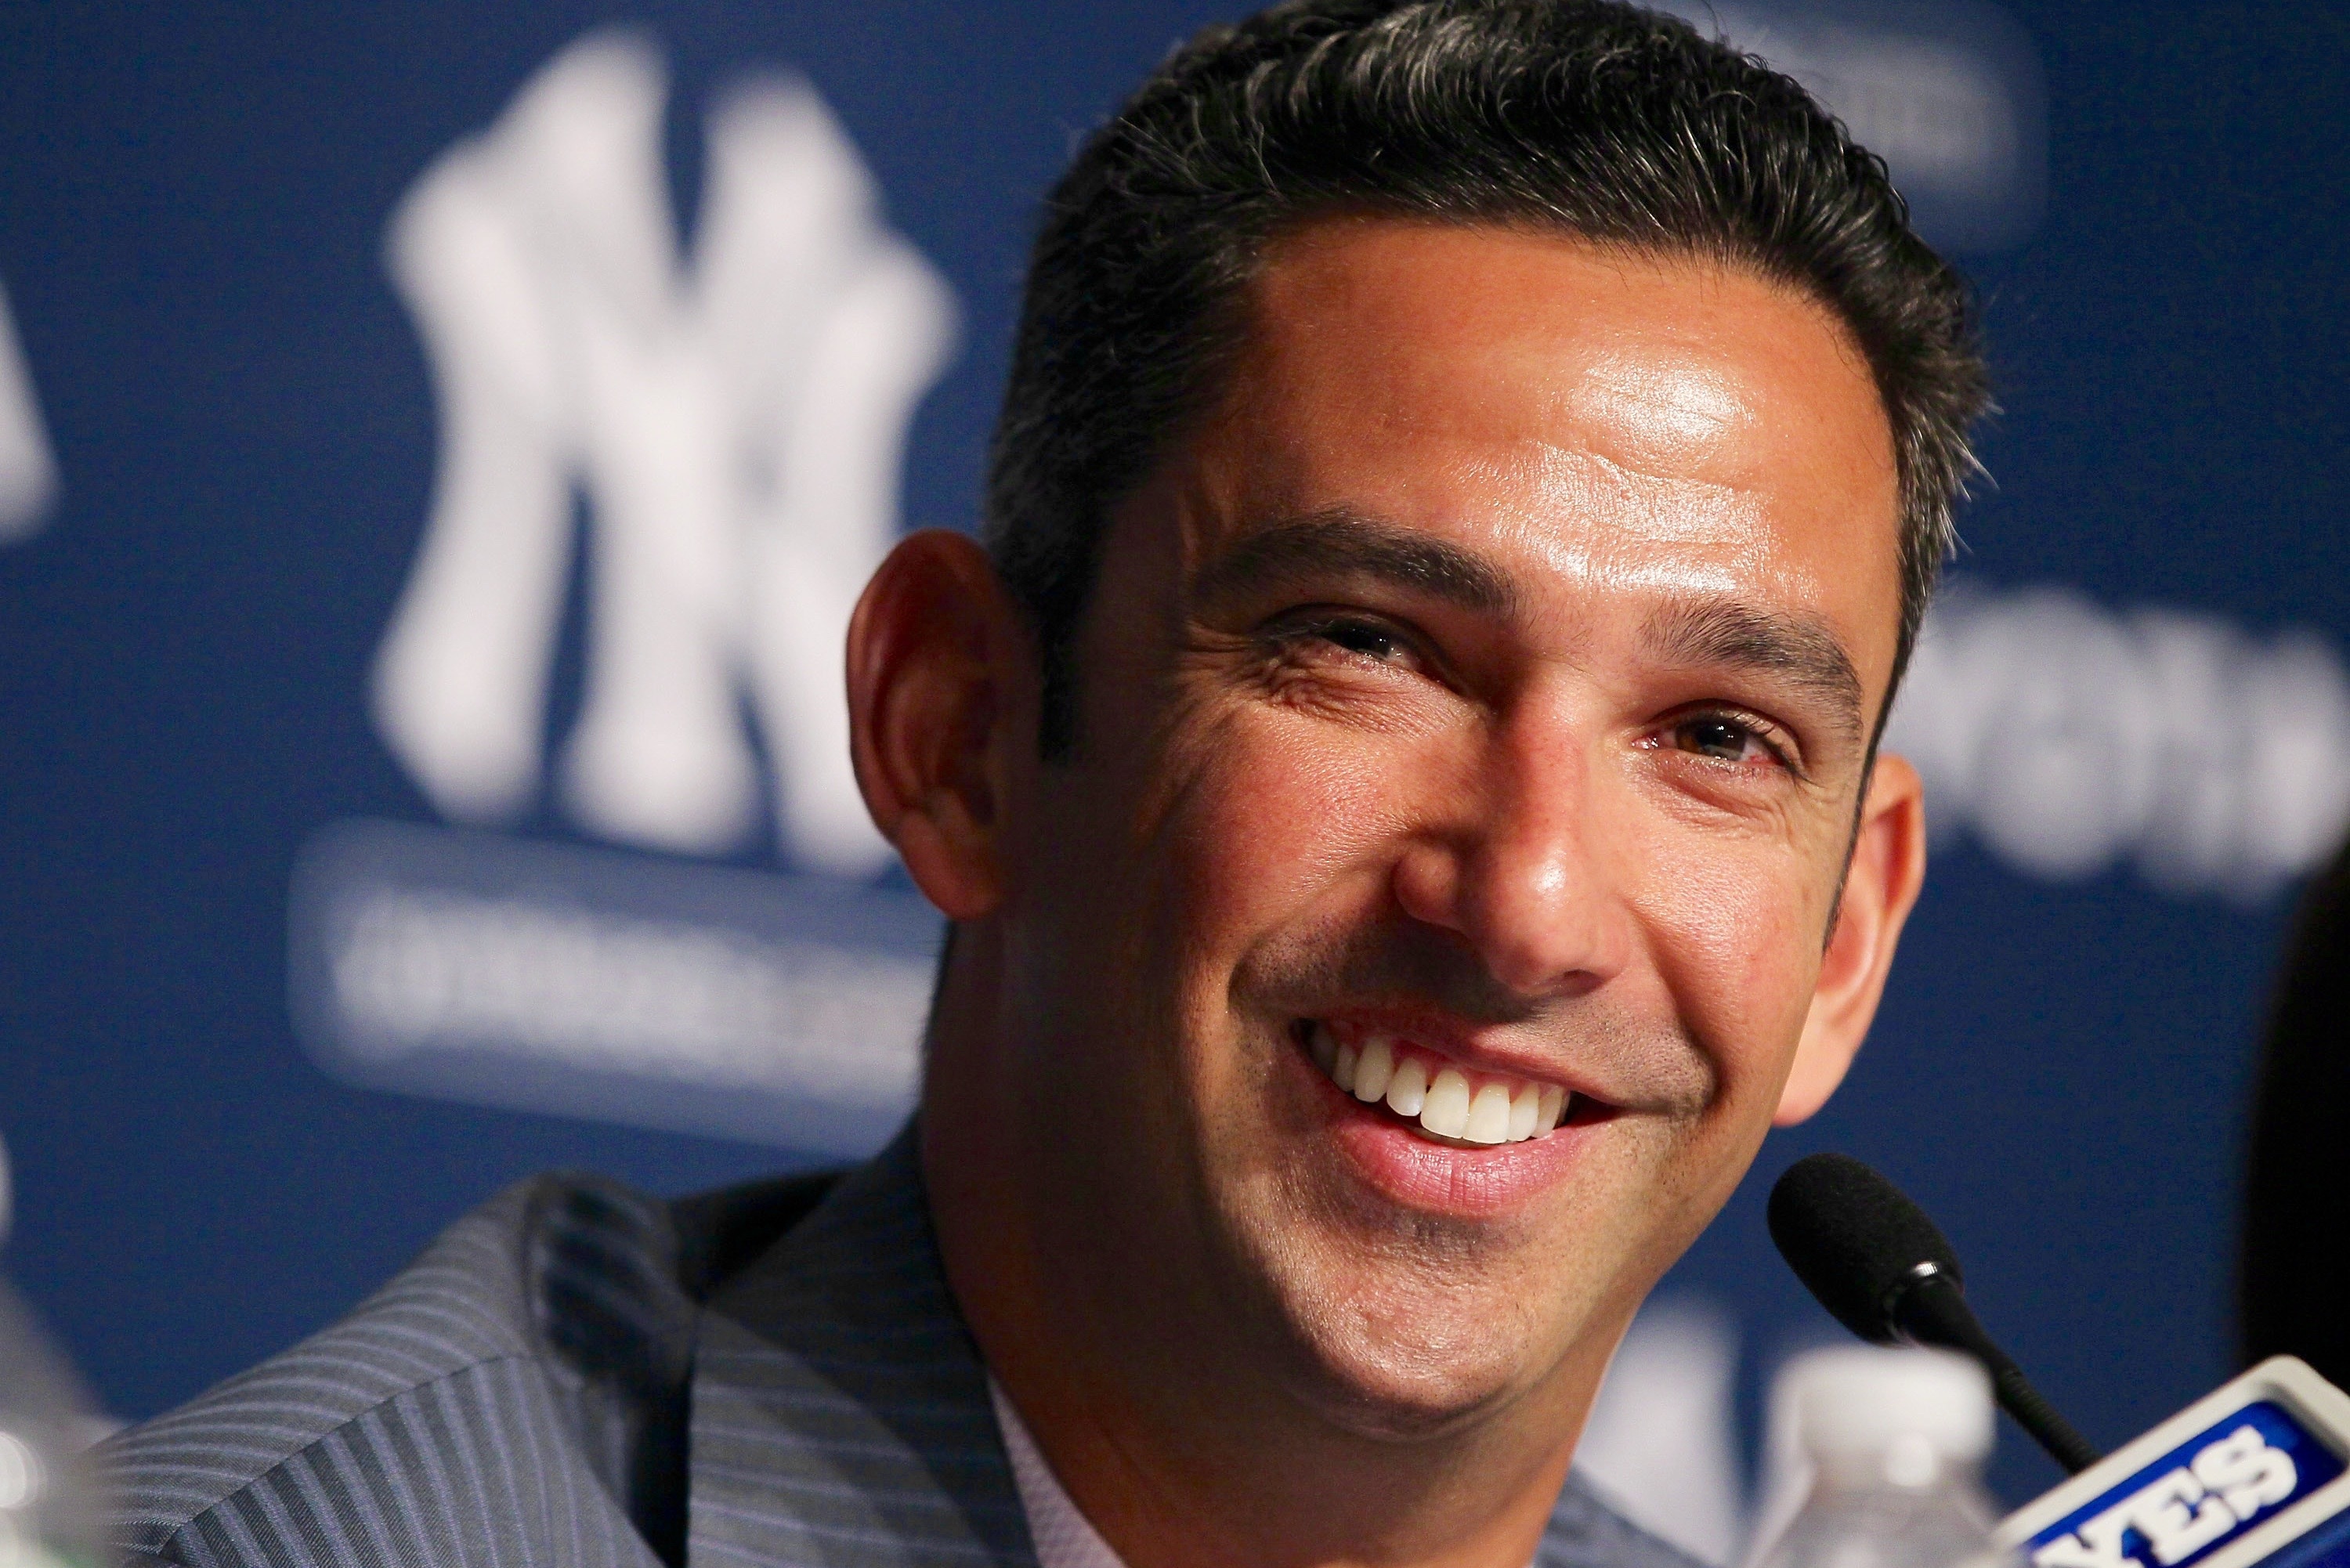 Yankees great Jorge Posada recounts his journey from community